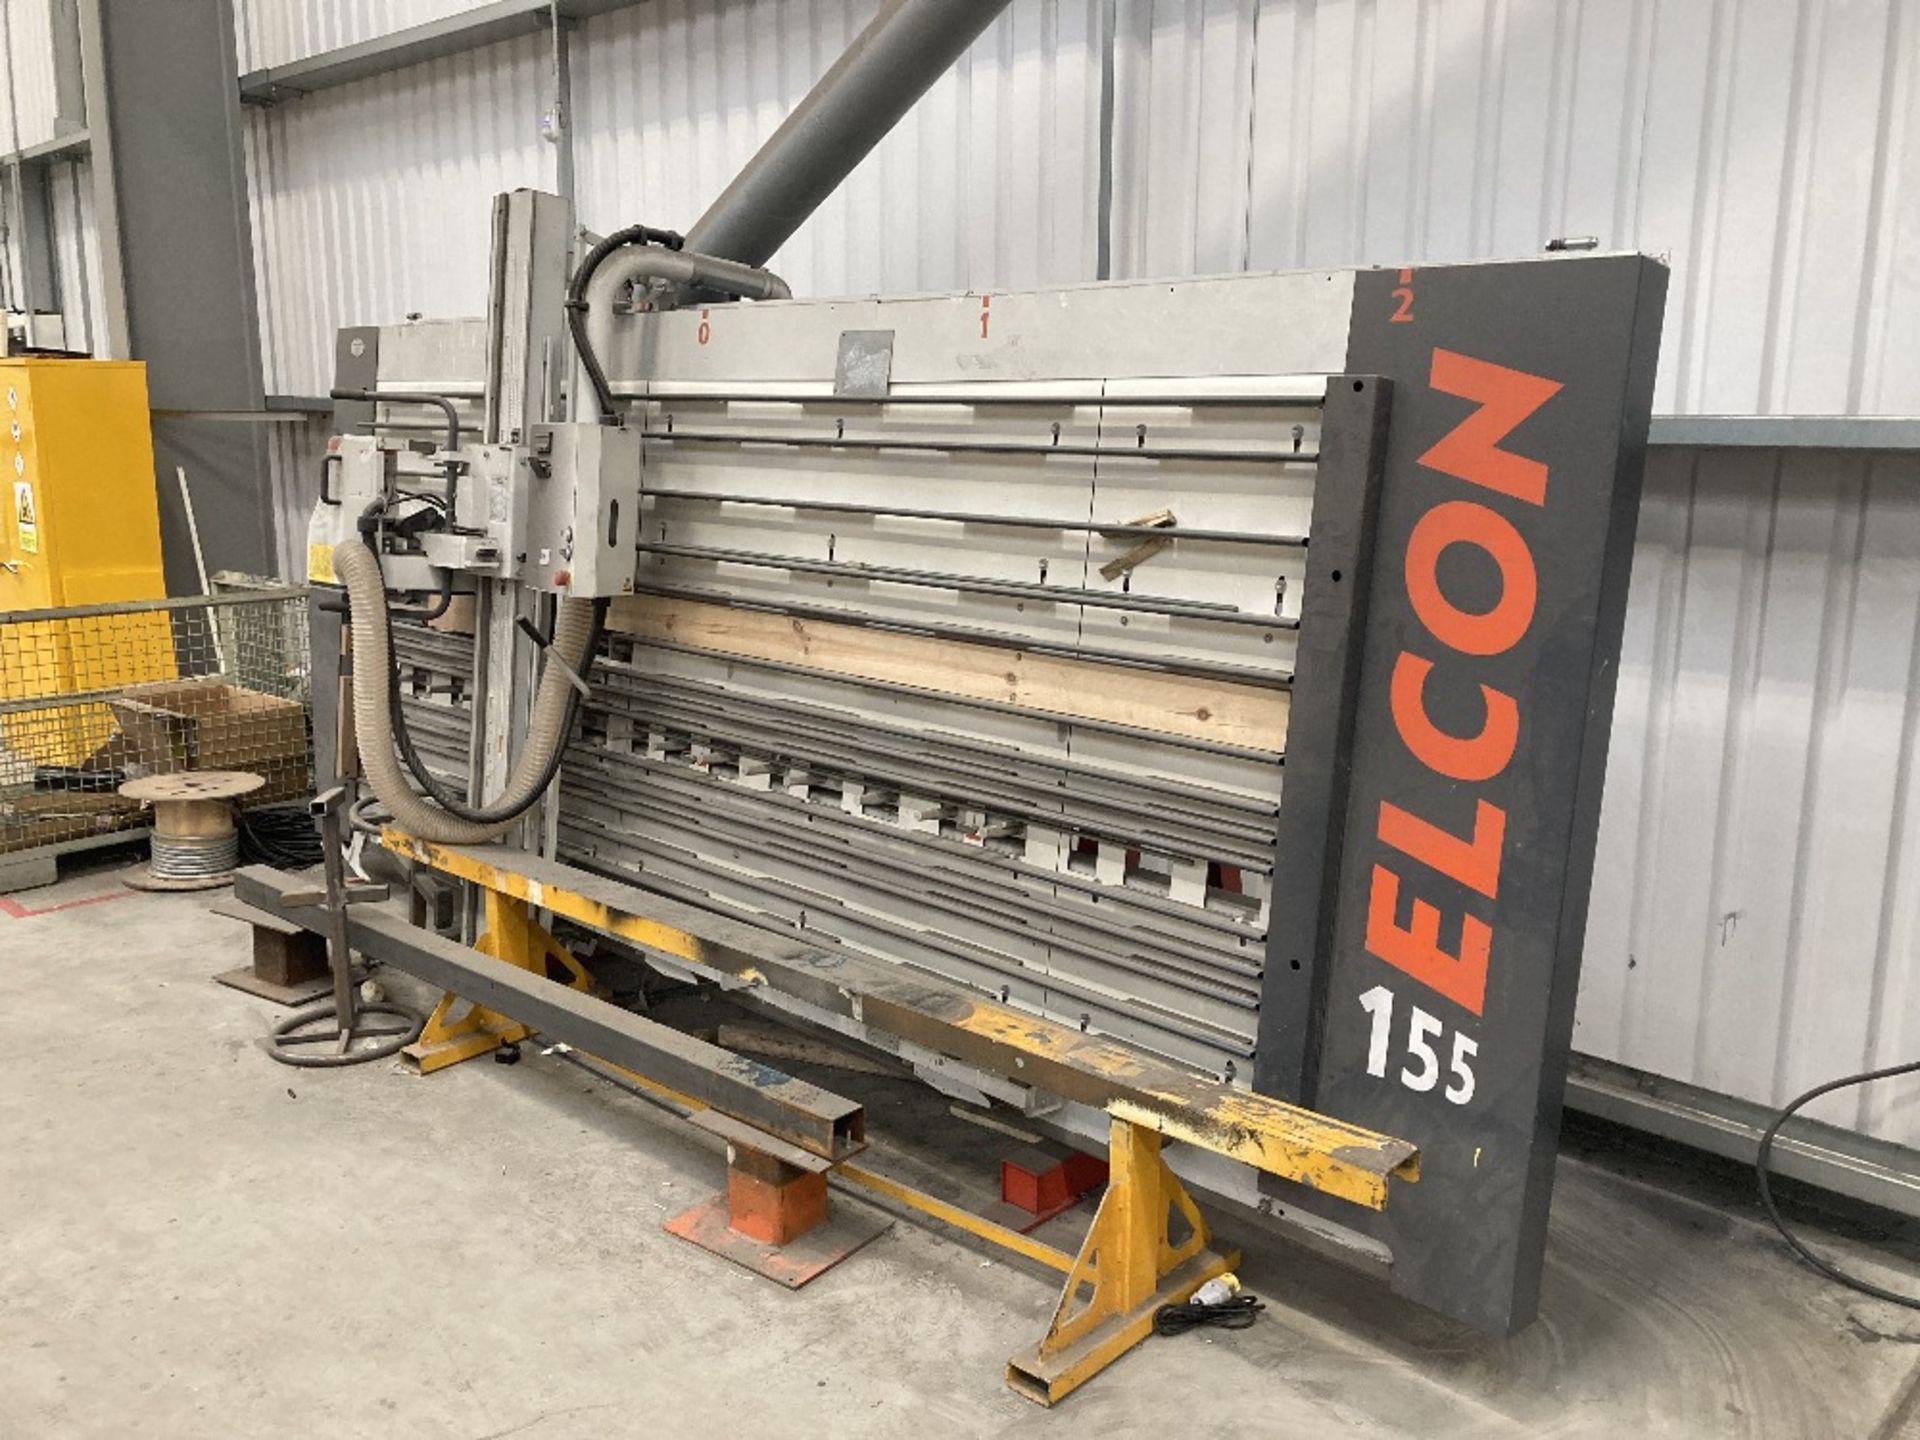 Elcon 155 DS Vertical Panel Saw